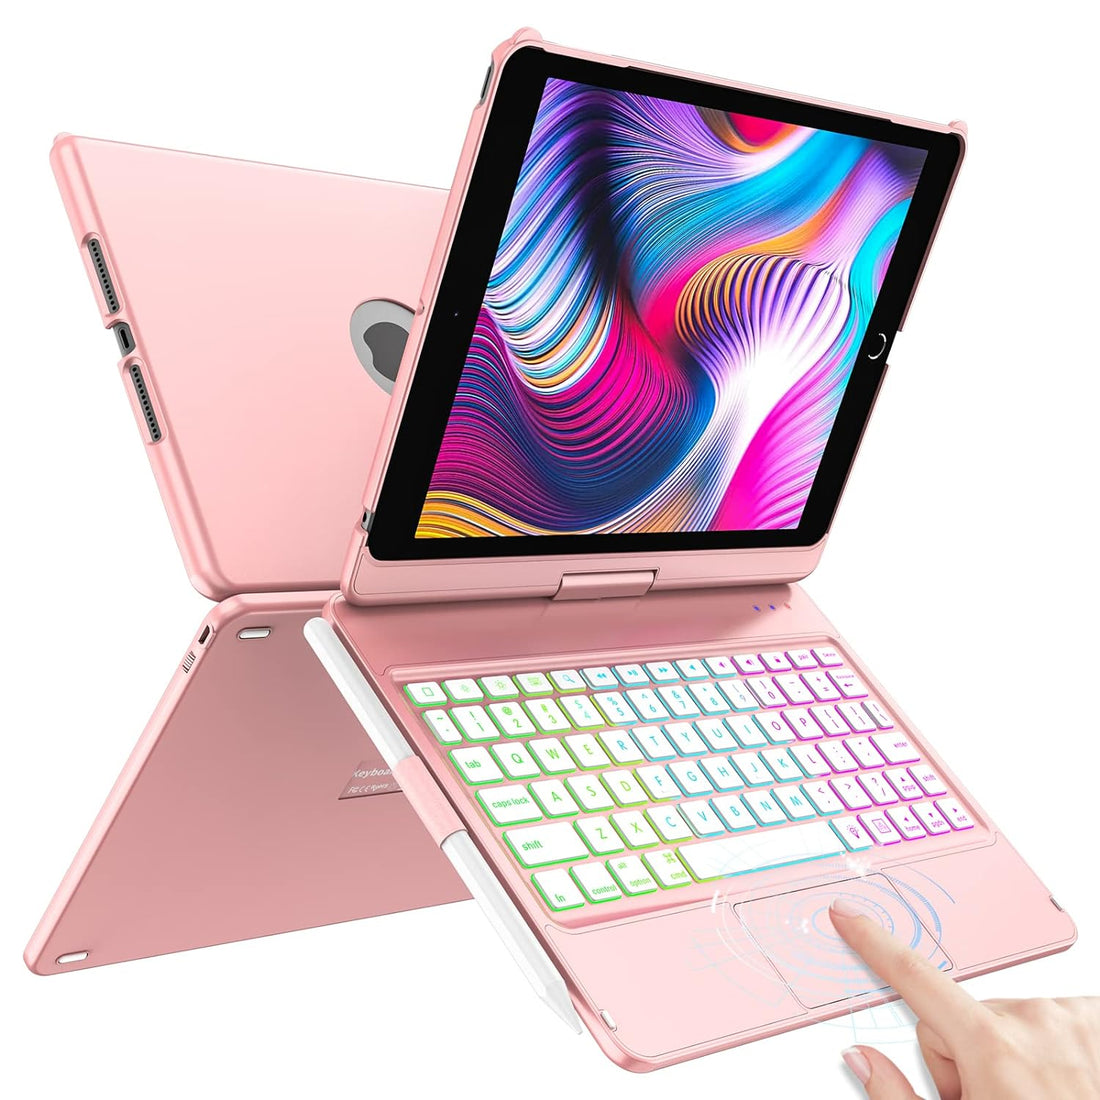 HOTLIFE Ipad Case Keyboard 10.2-Ipad Keyboard 9Th Generation&8Th&7Th Gen-Touch Keyboard-360° Rotatable Protective Cover With Apple Pencil Holder-Backlight Wireless Keyboard-Ipad 9 Keyboard,Pink